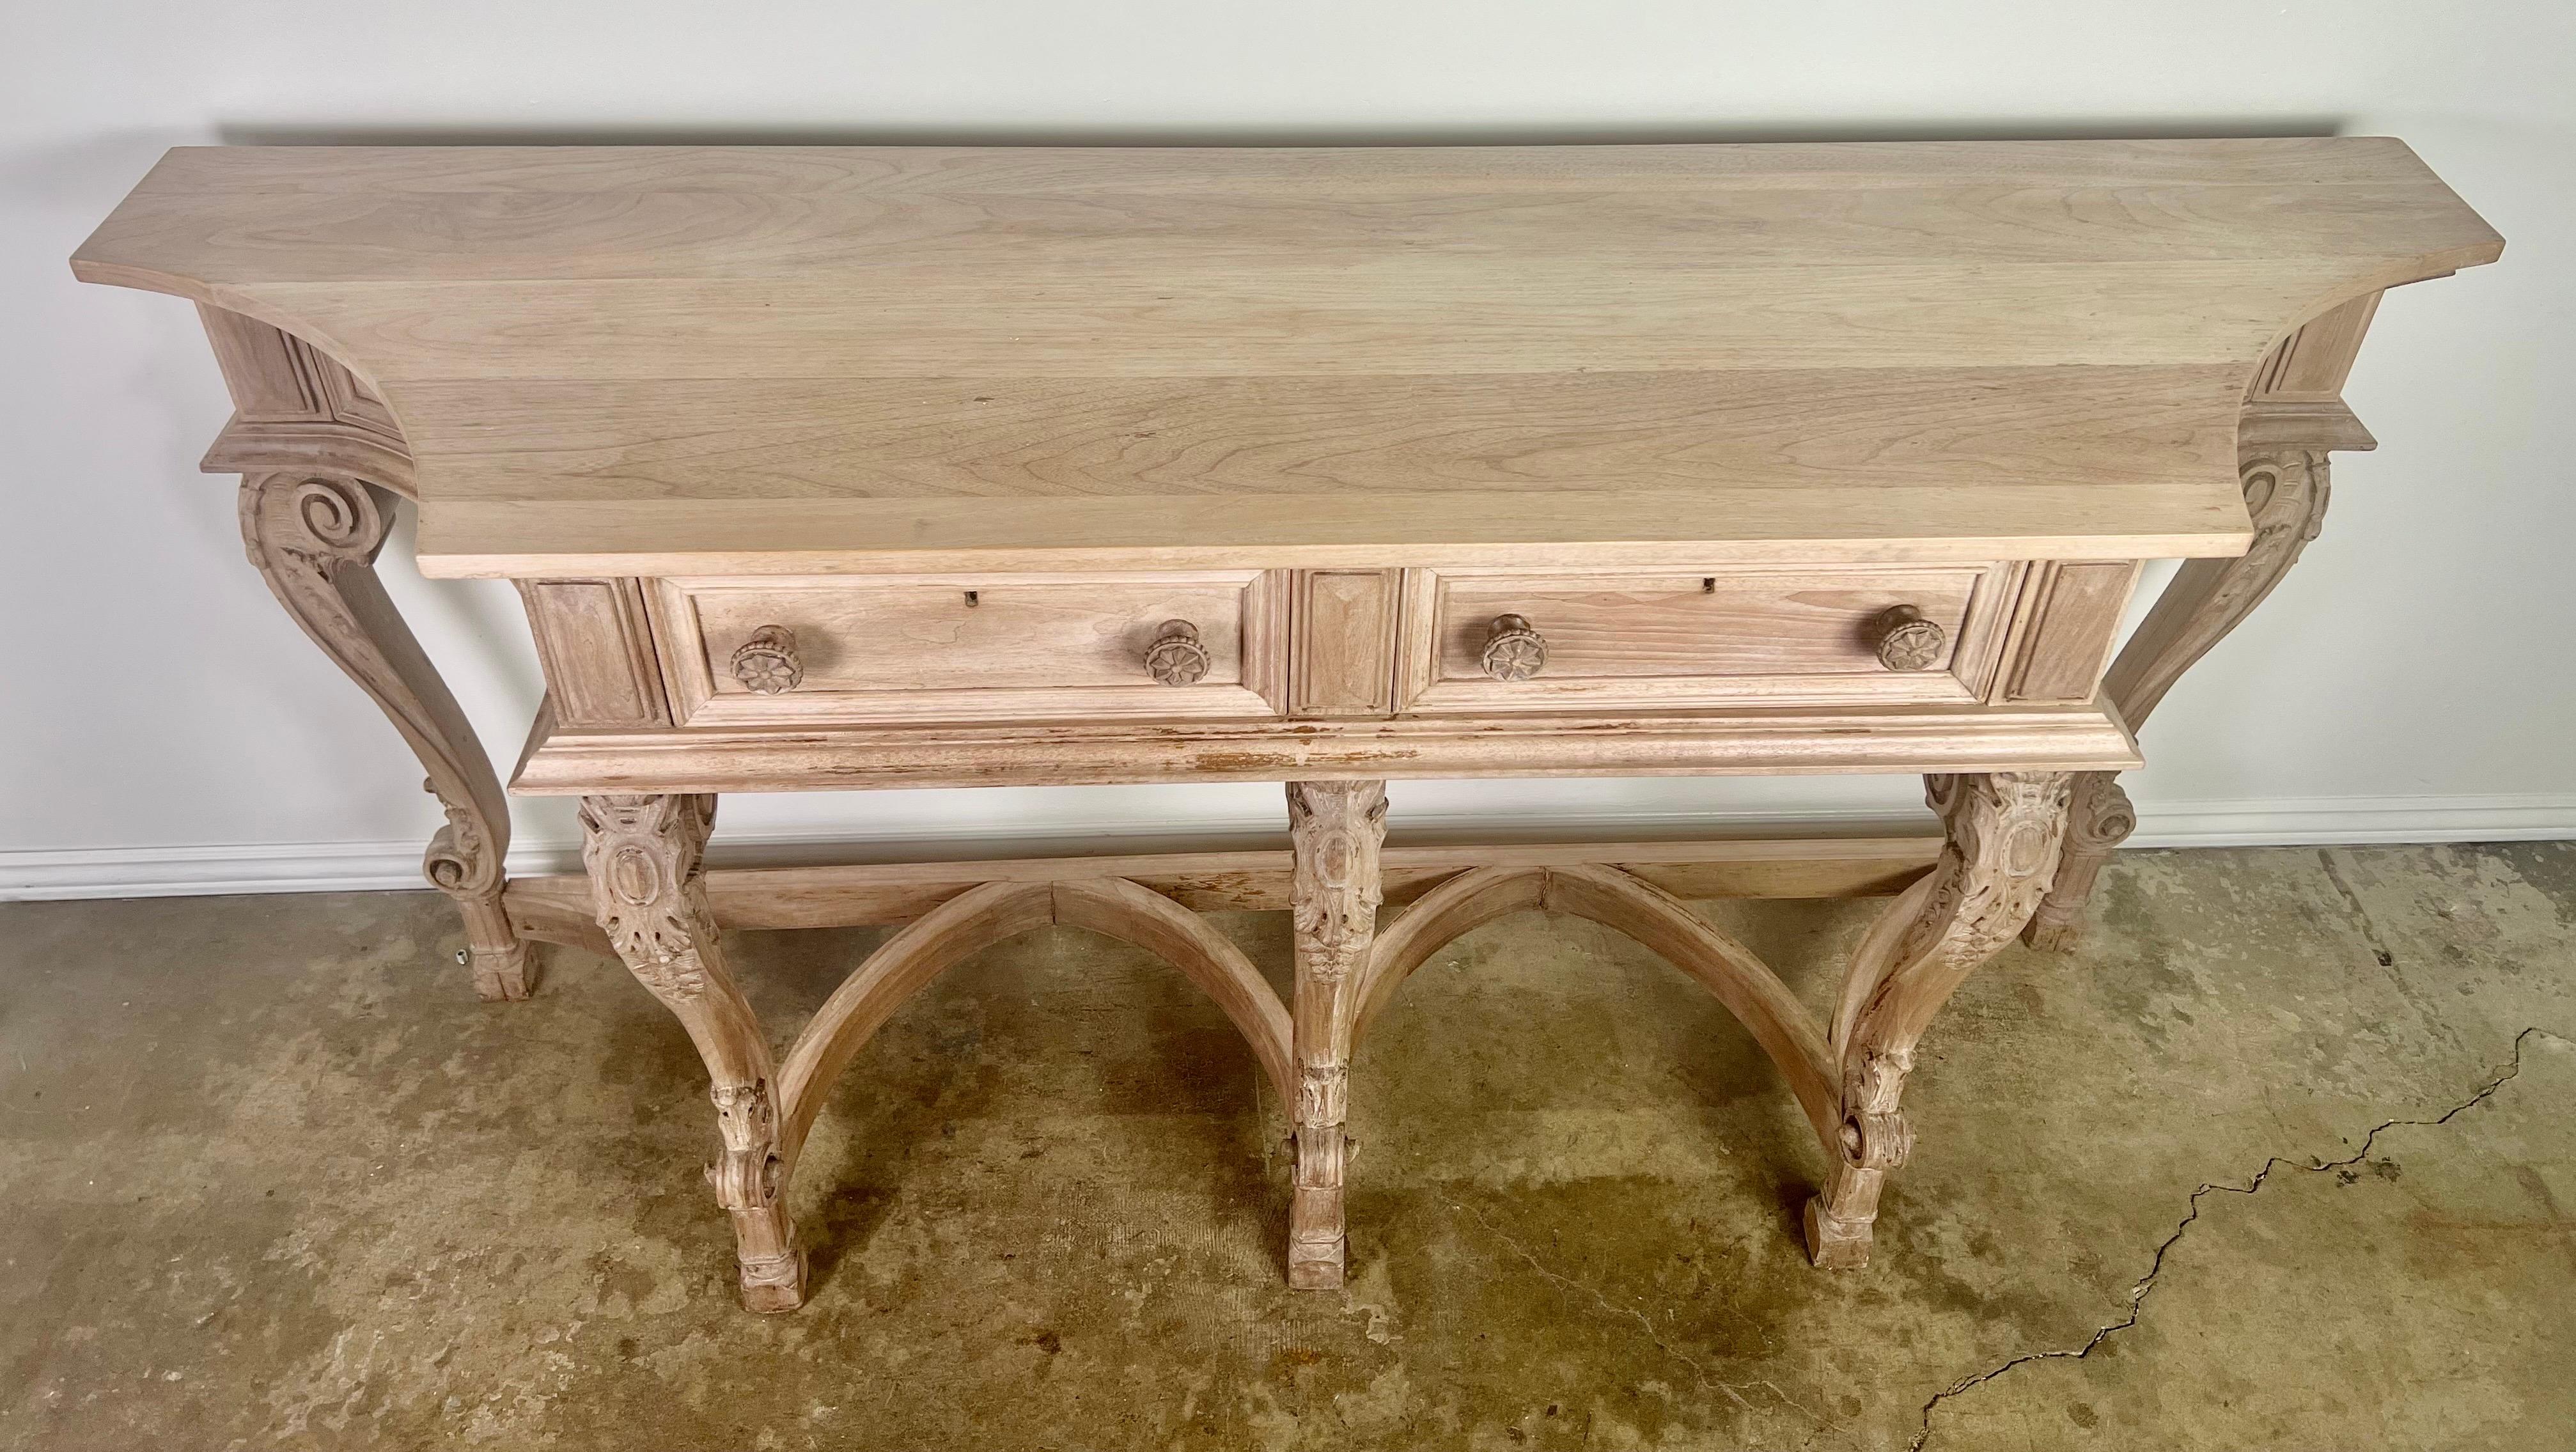 19th Century. French carved wood bleached walnut buffet. The buffet stands on five cabriole legs with rams head feet. A scalloped stretcher connects the legs at center. The console has carved acanthus leaves and beautiful cartouche carvings